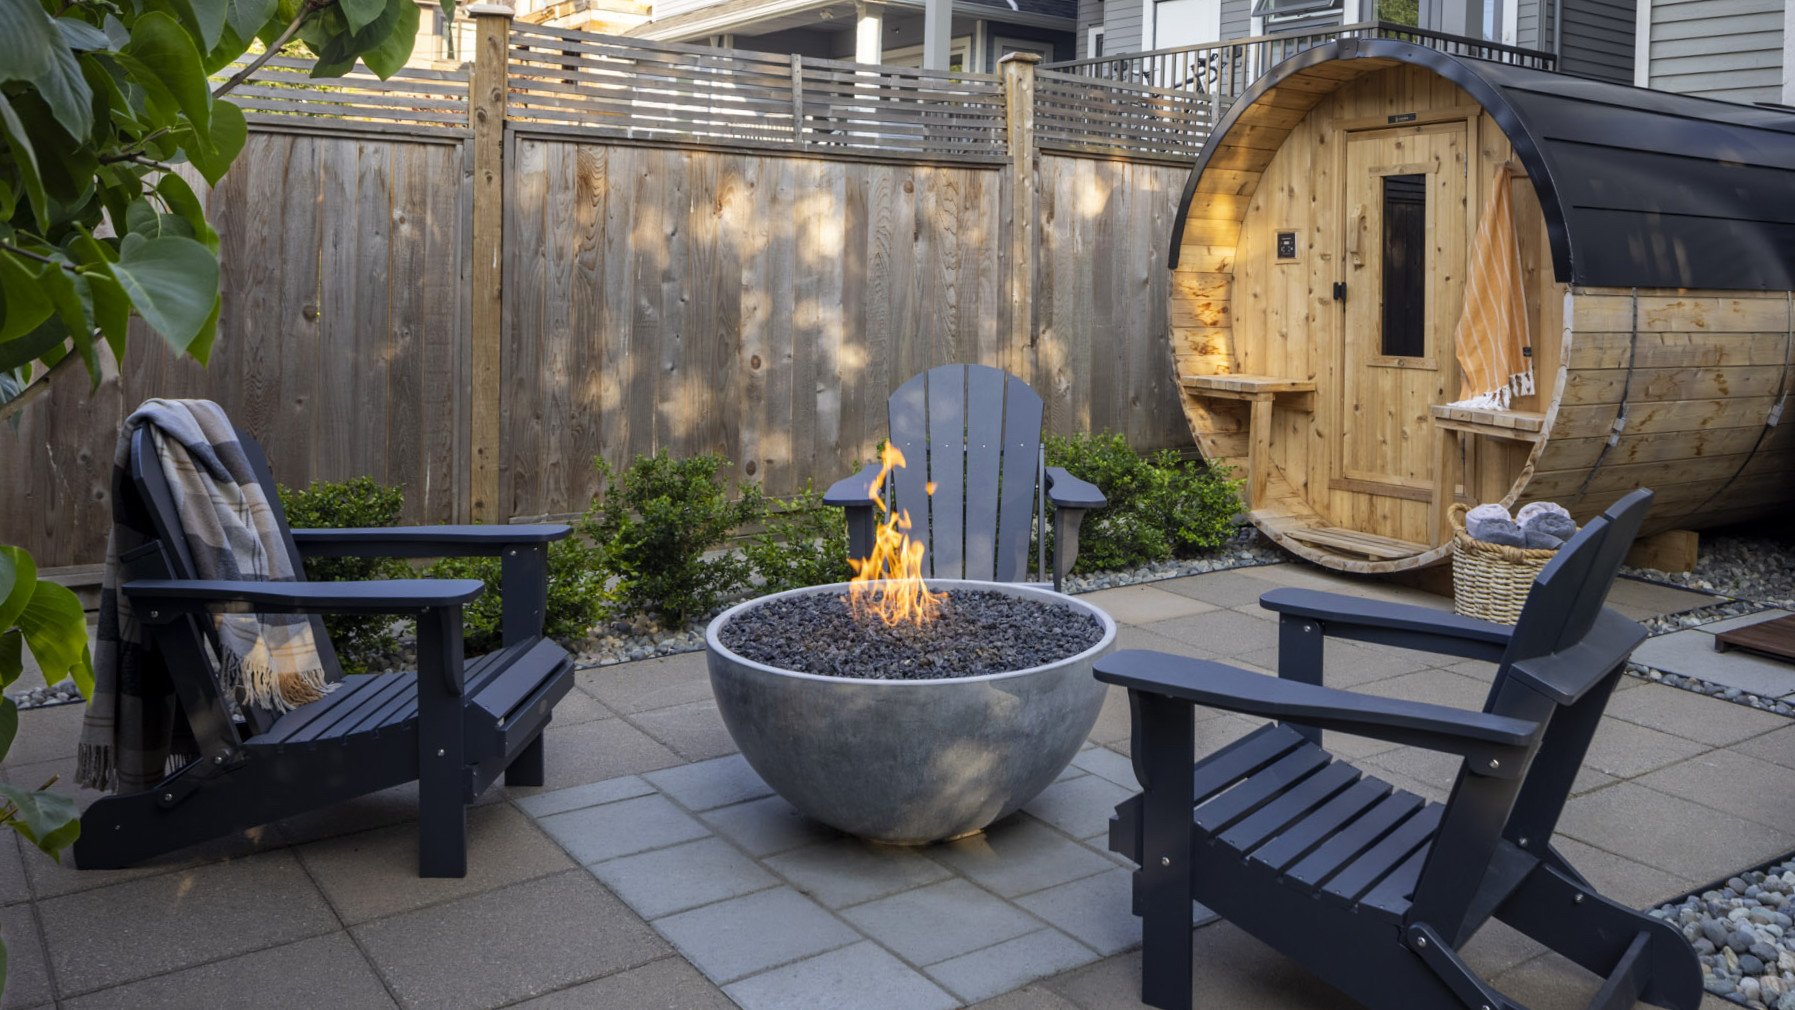 Are fire pits legal in Alberta?